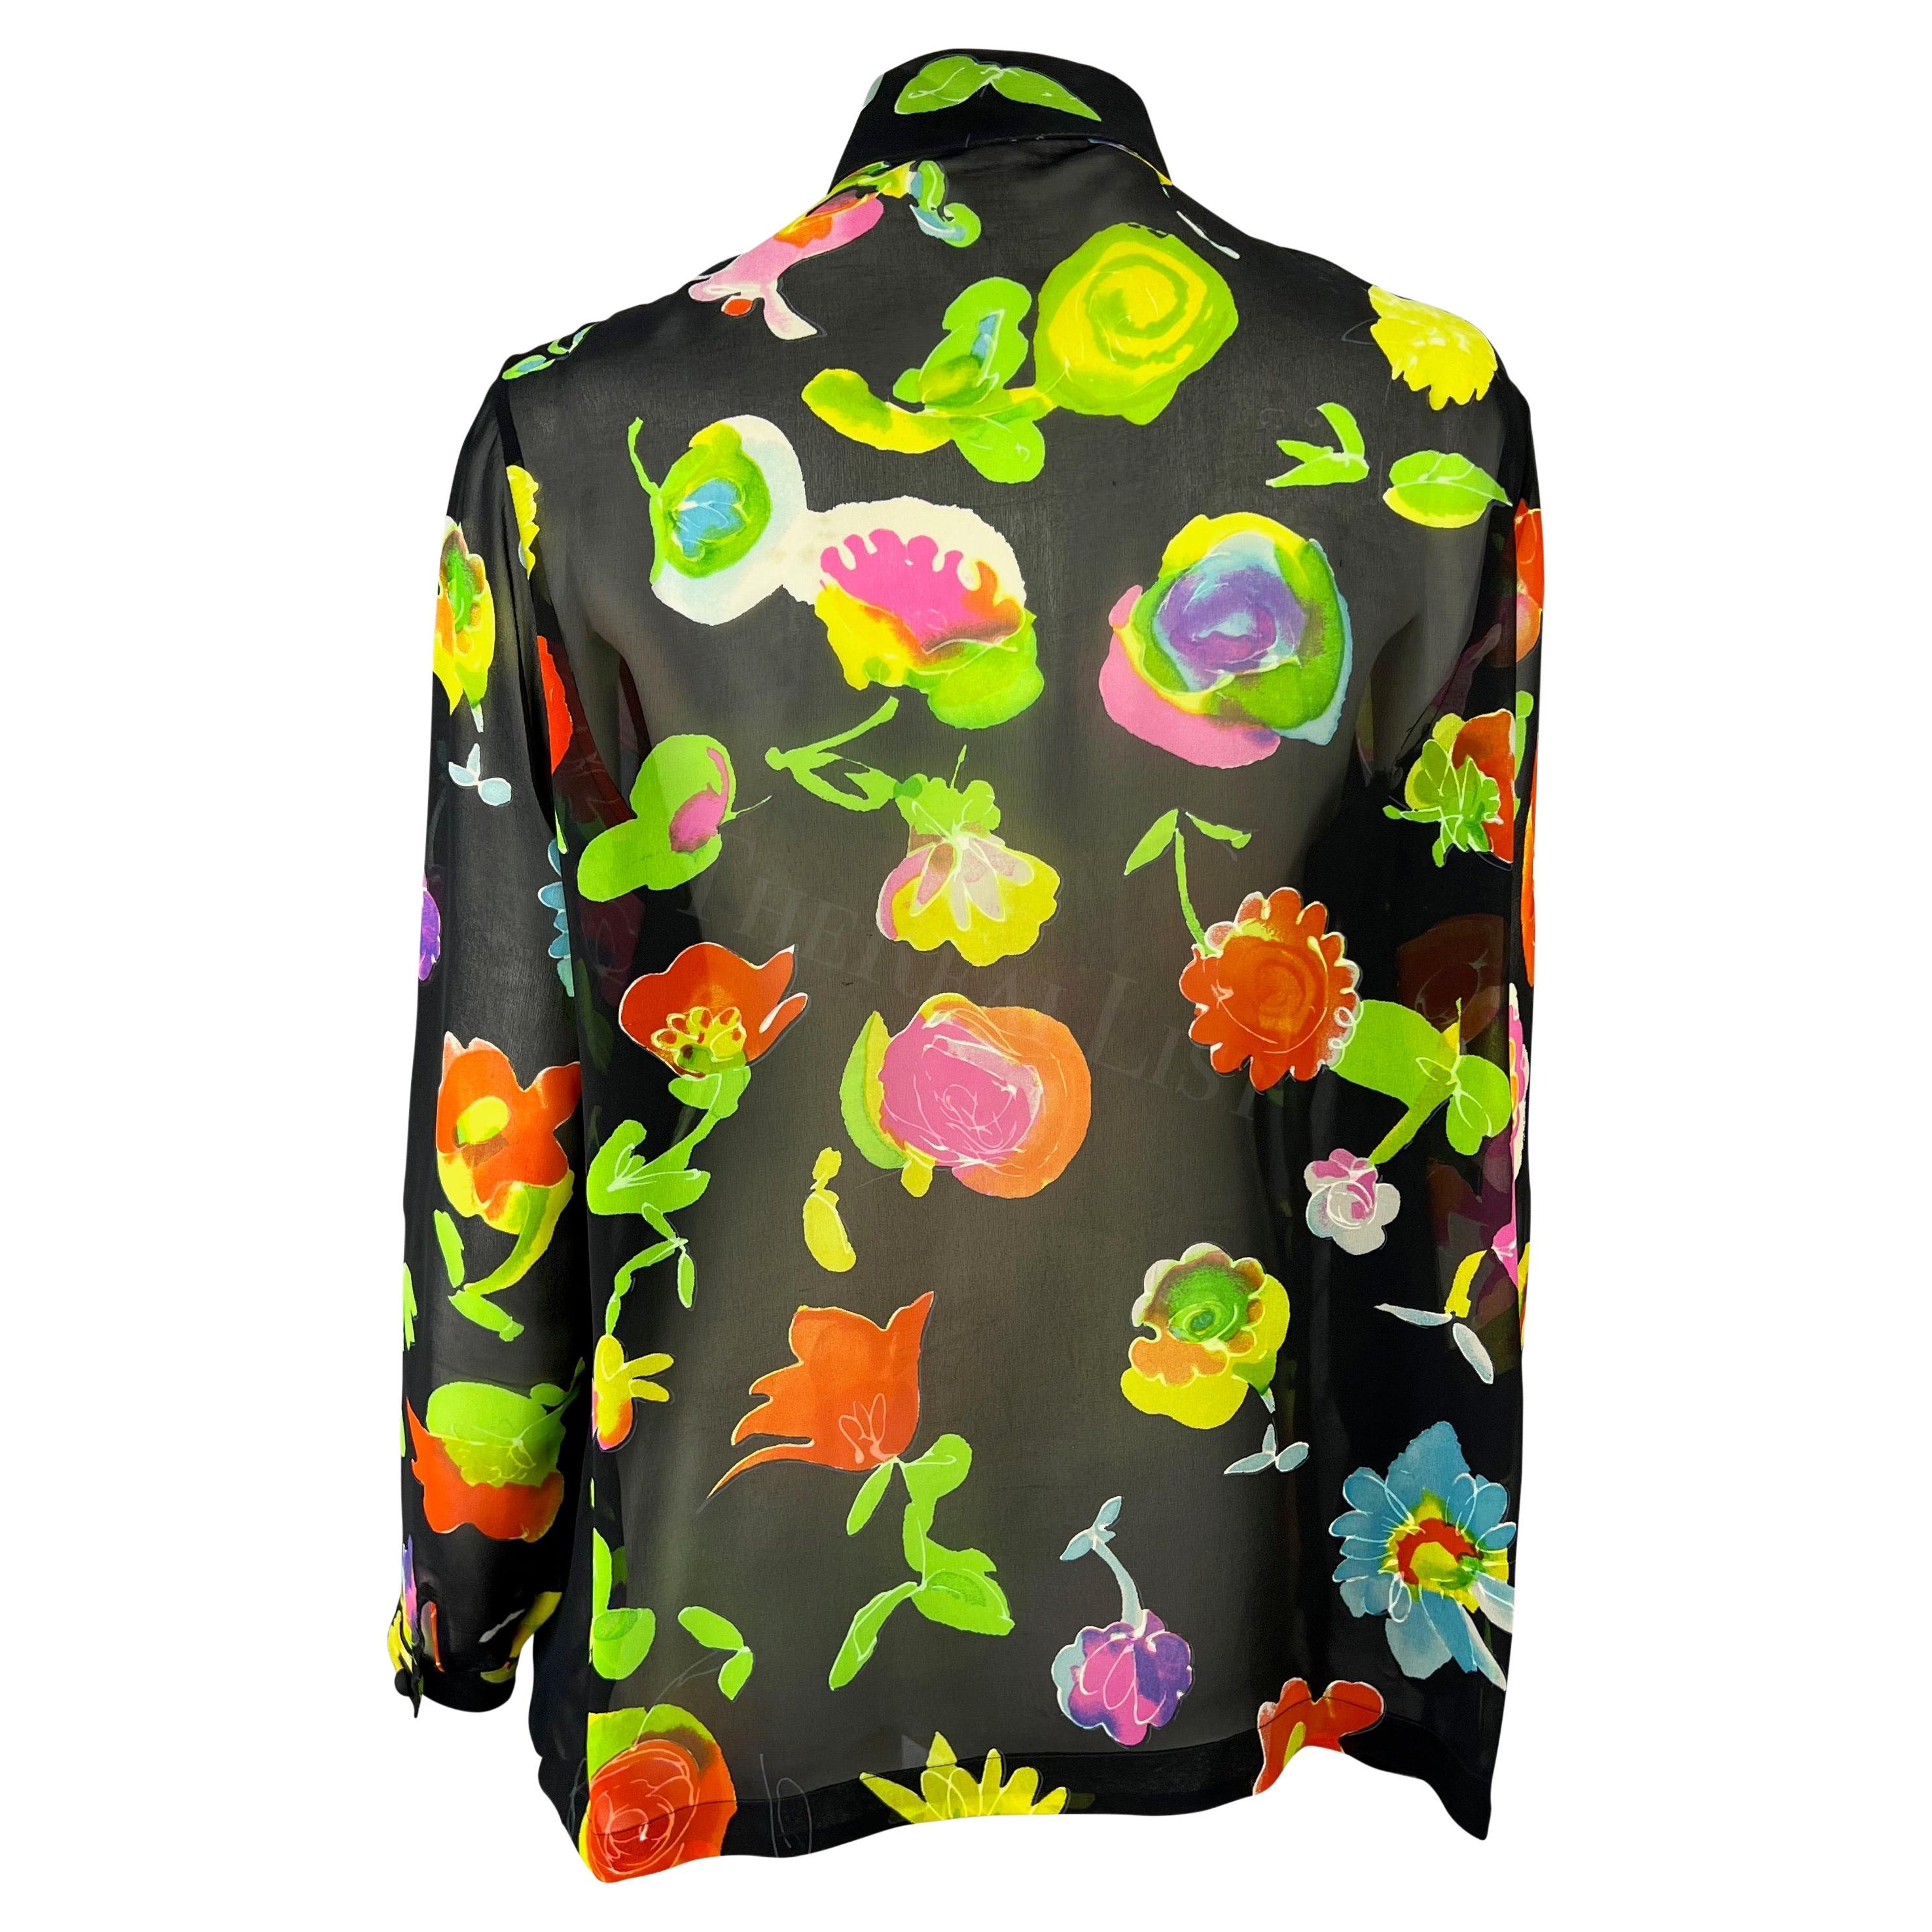 Women's S/S 1996 Gianni Versace Black Floral Sheer Button Down Shirt For Sale